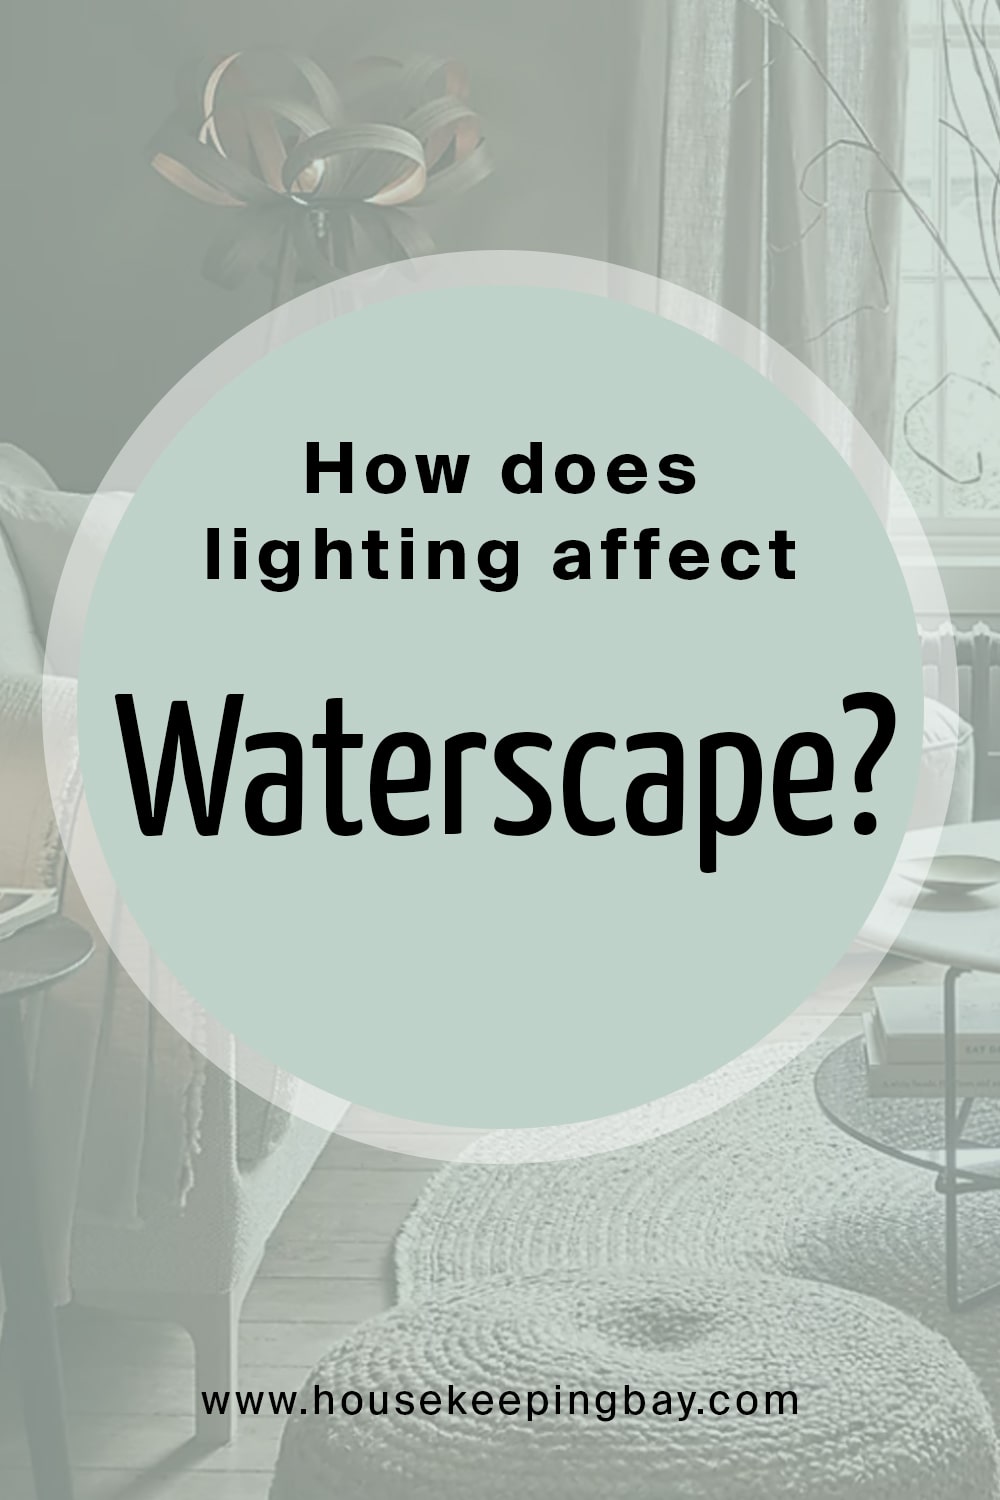 How does lighting affect Waterscape